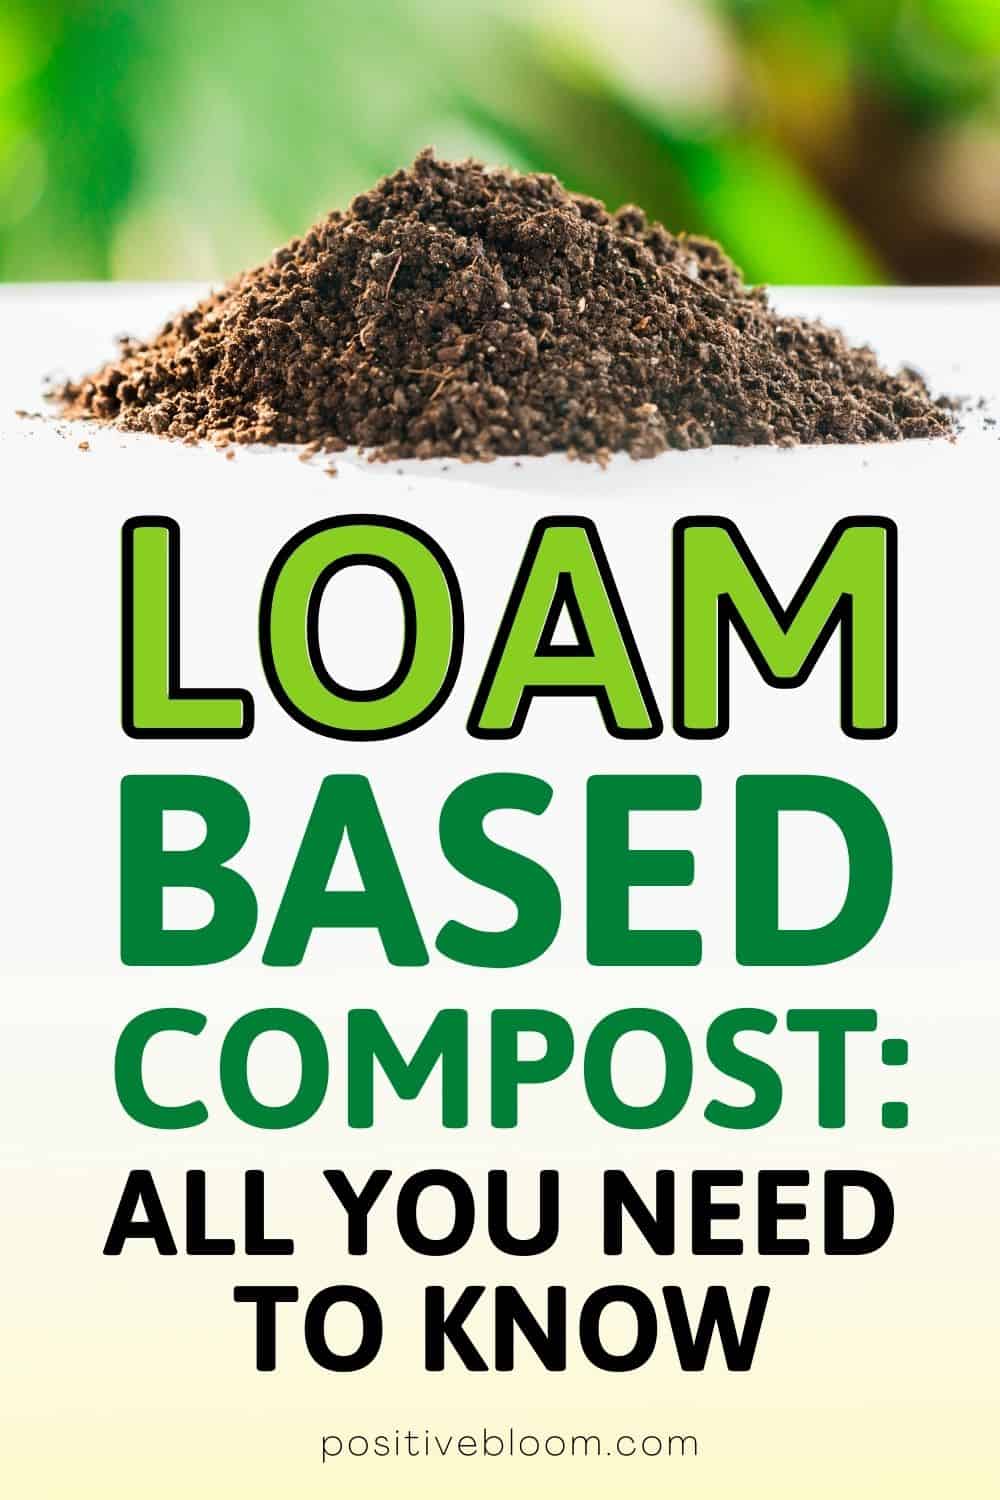 Loam Based Compost All You Need To Know